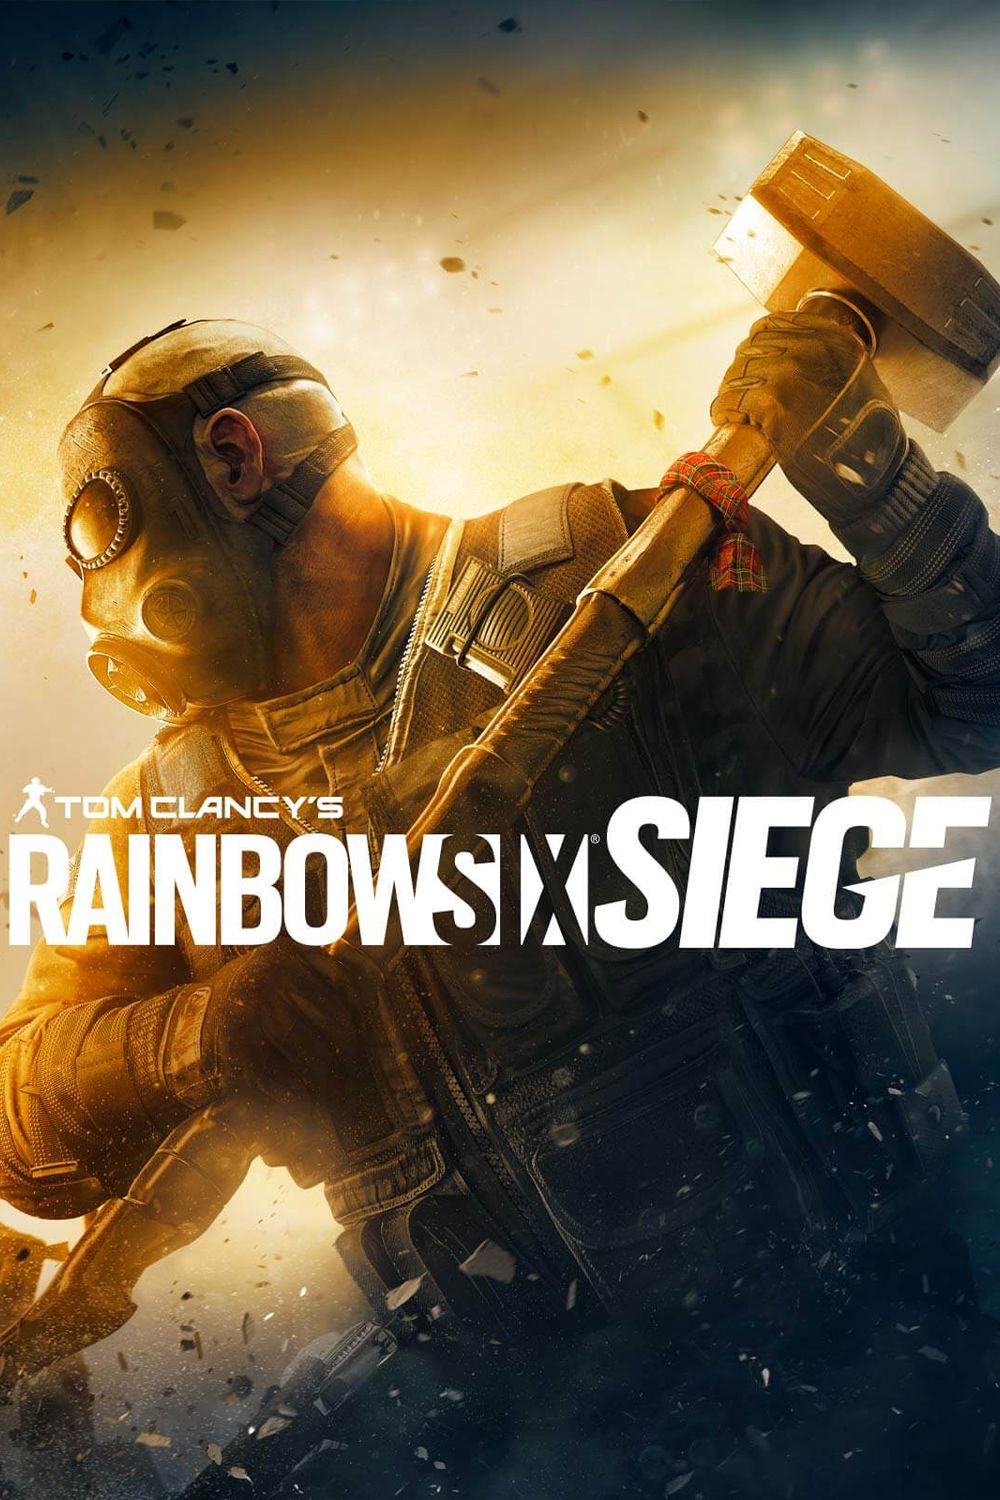 Rainbow Six Siege Y8S3.1 Update for 12 September Patch Notes